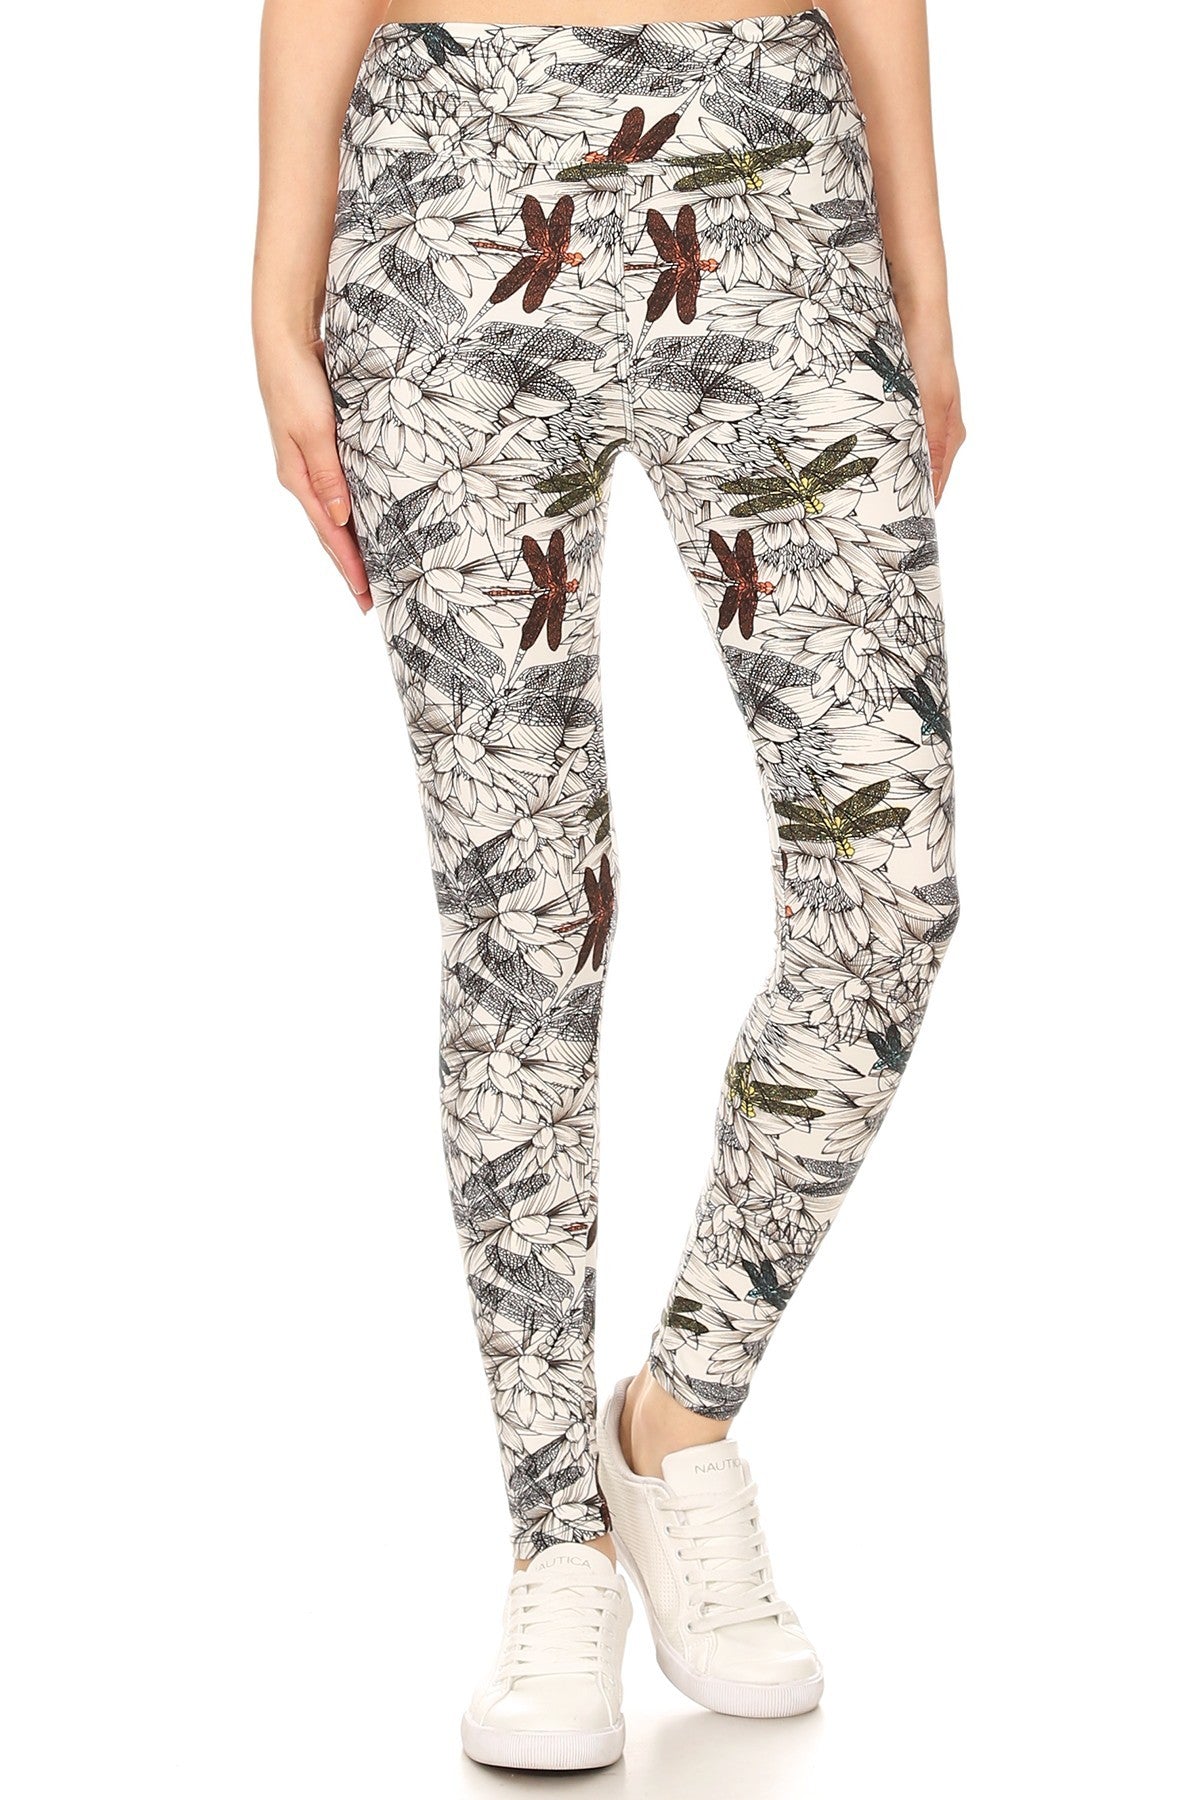 Yoga Style Banded Lined Dragonfly Print, Full Length Leggings In A Slim Fitting Style With A Banded High Waist